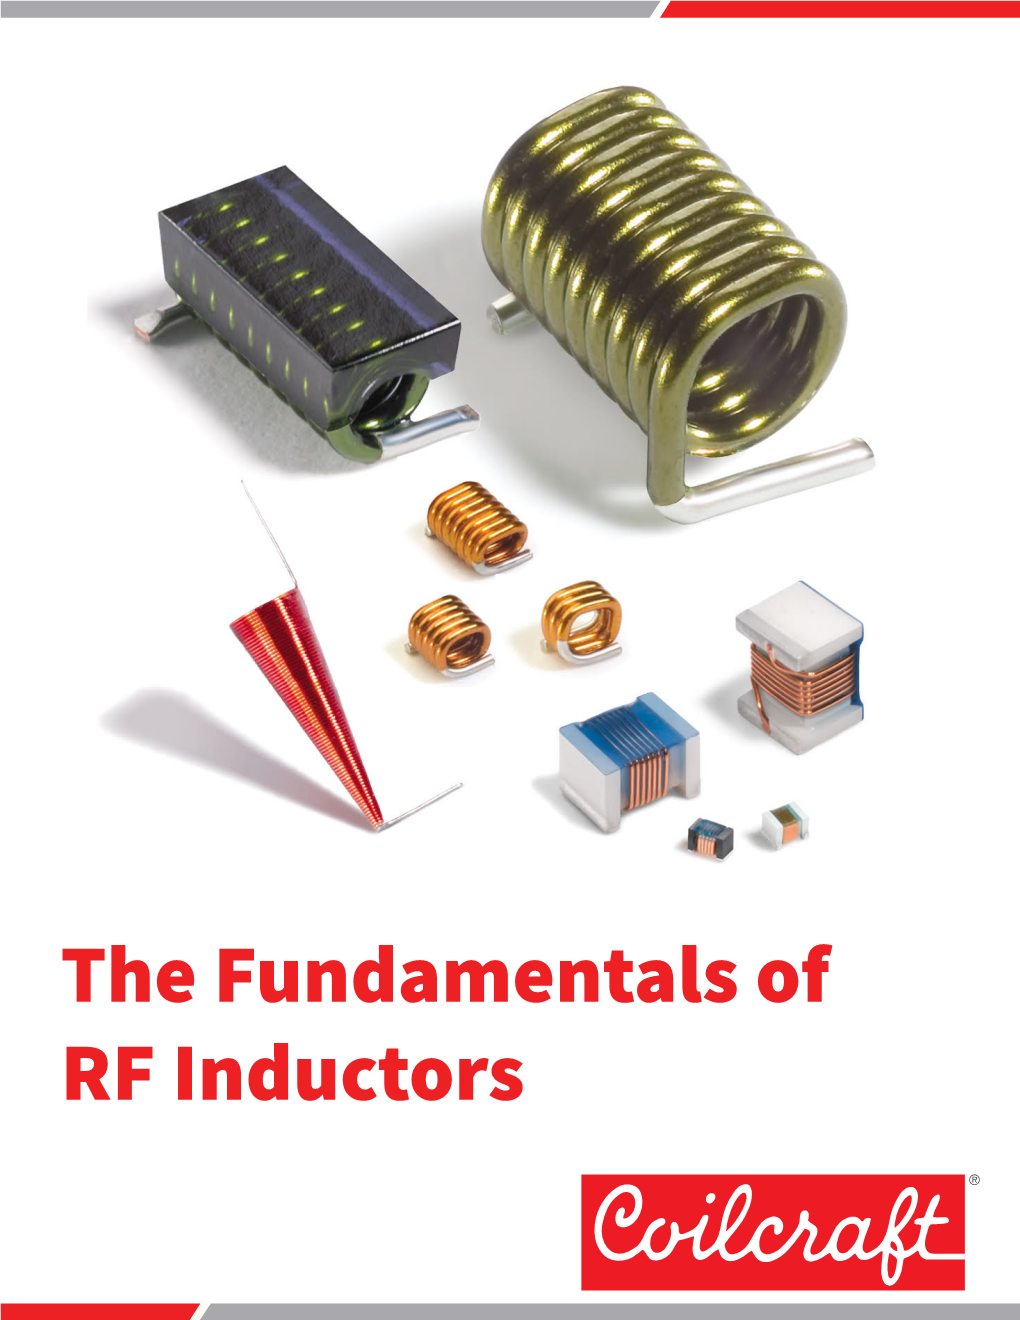 The Fundamentals of RF Inductors the Fundamentals of RF Inductors